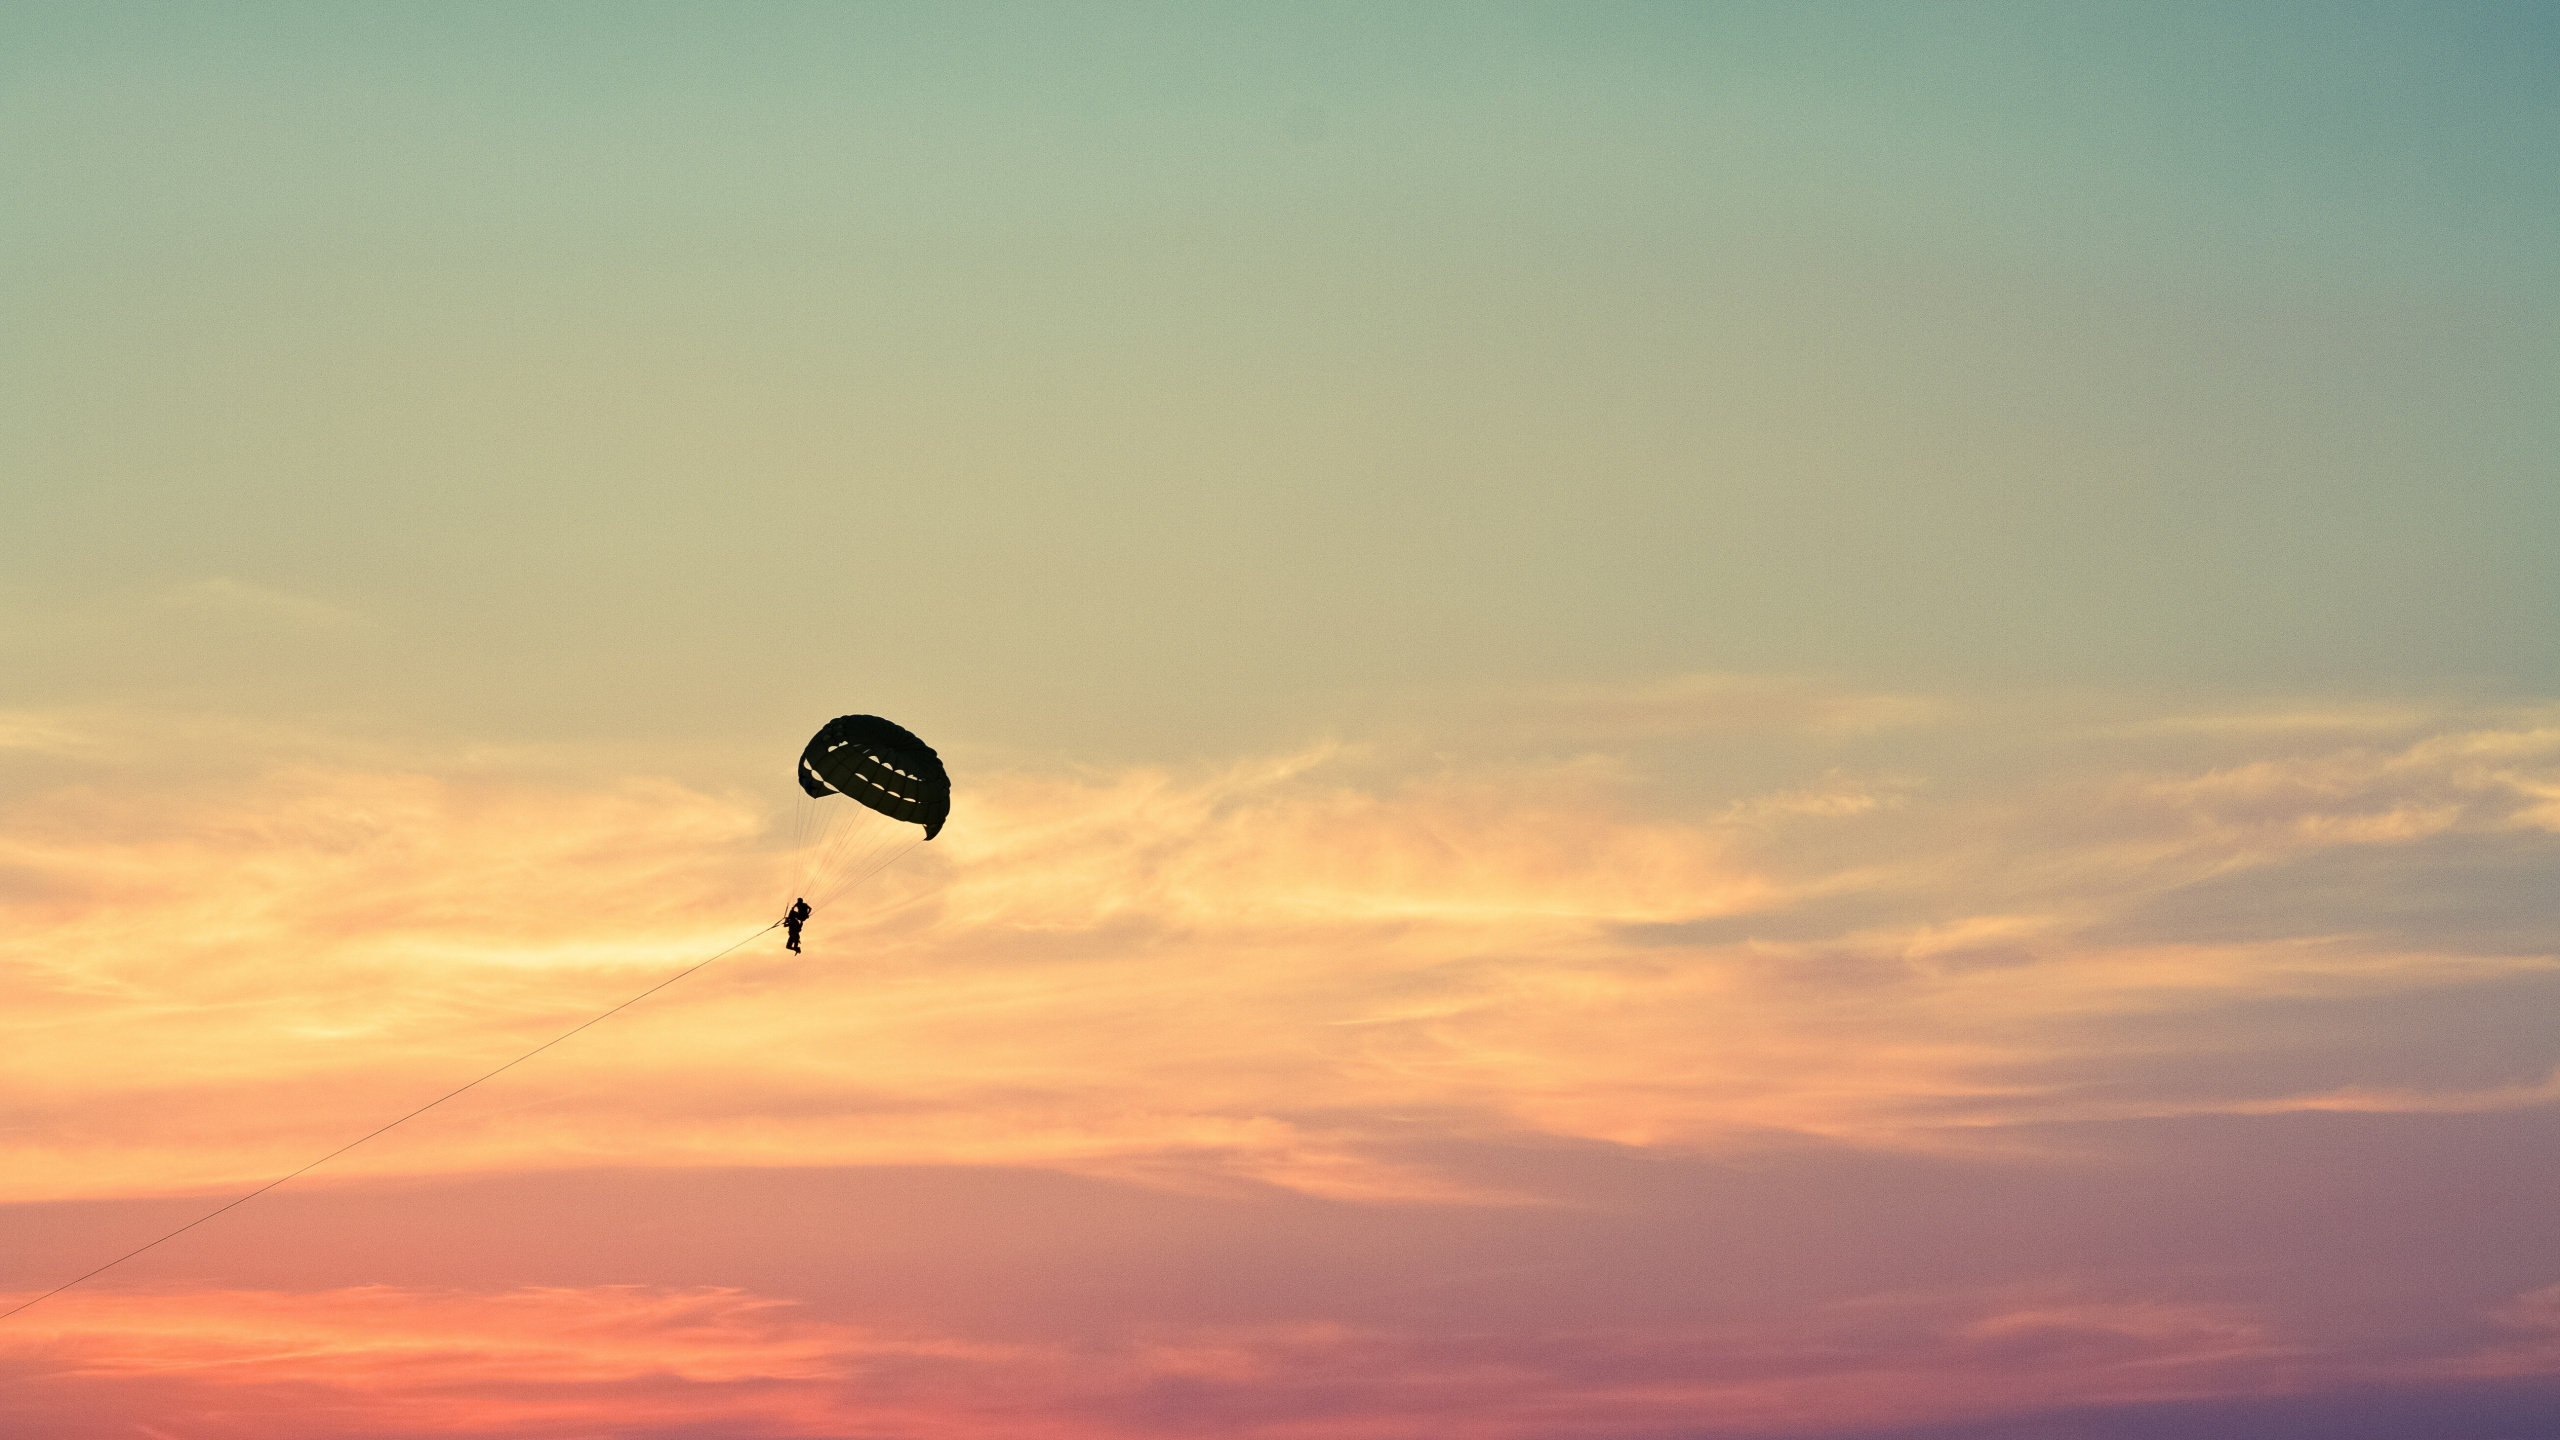 Person in Parachute Under Blue Sky During Daytime. Wallpaper in 2560x1440 Resolution